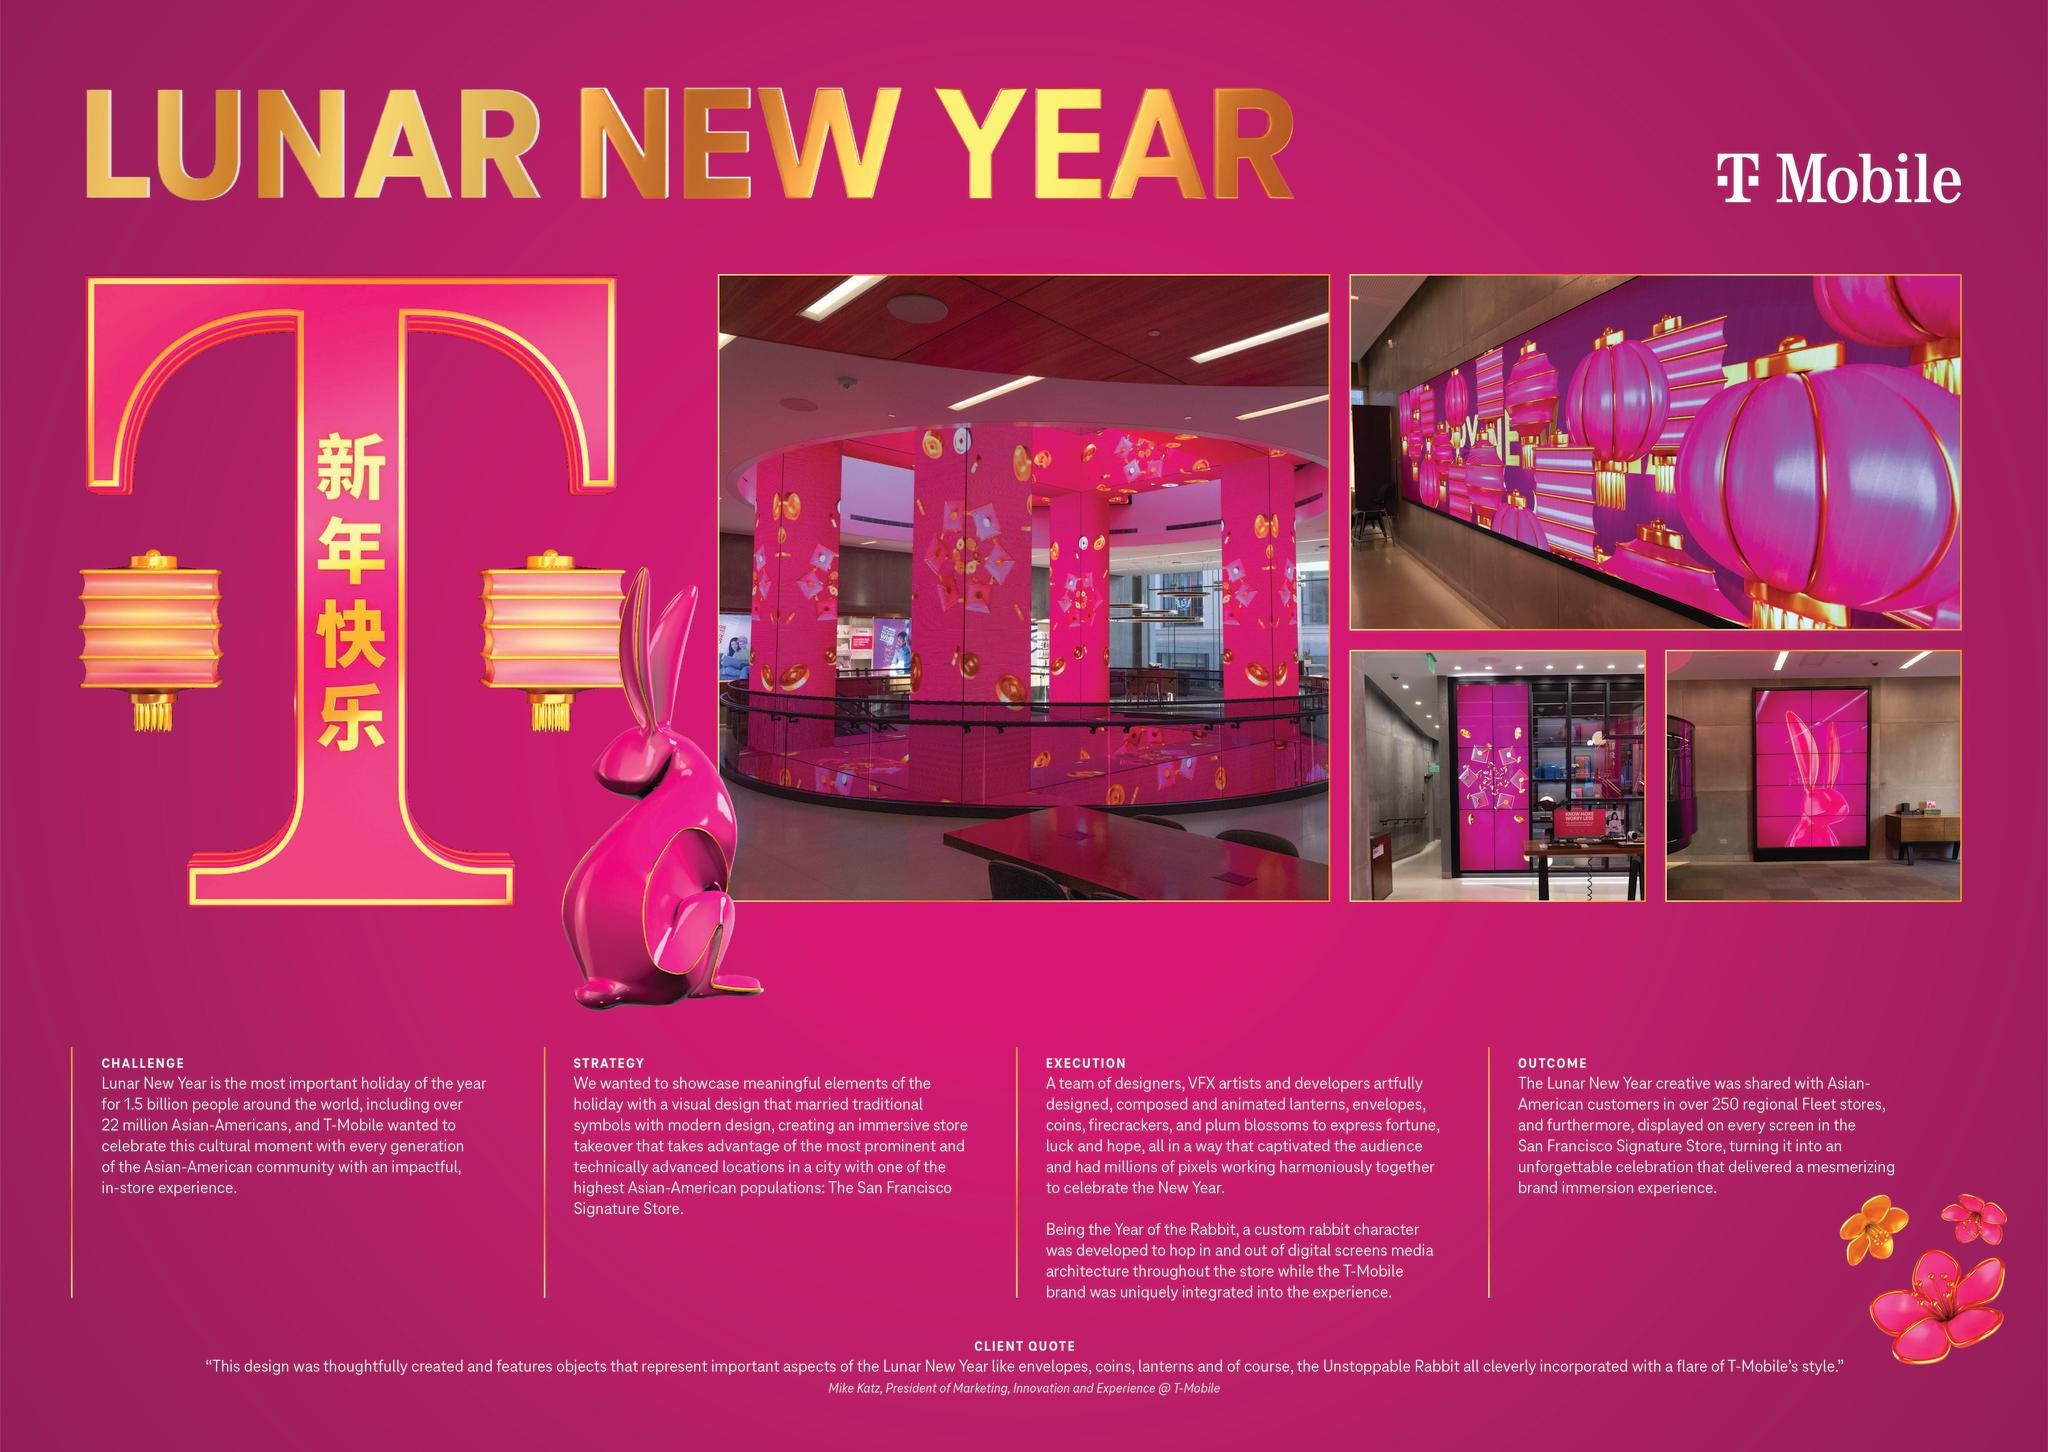 Lunar New Year by T-Mobile